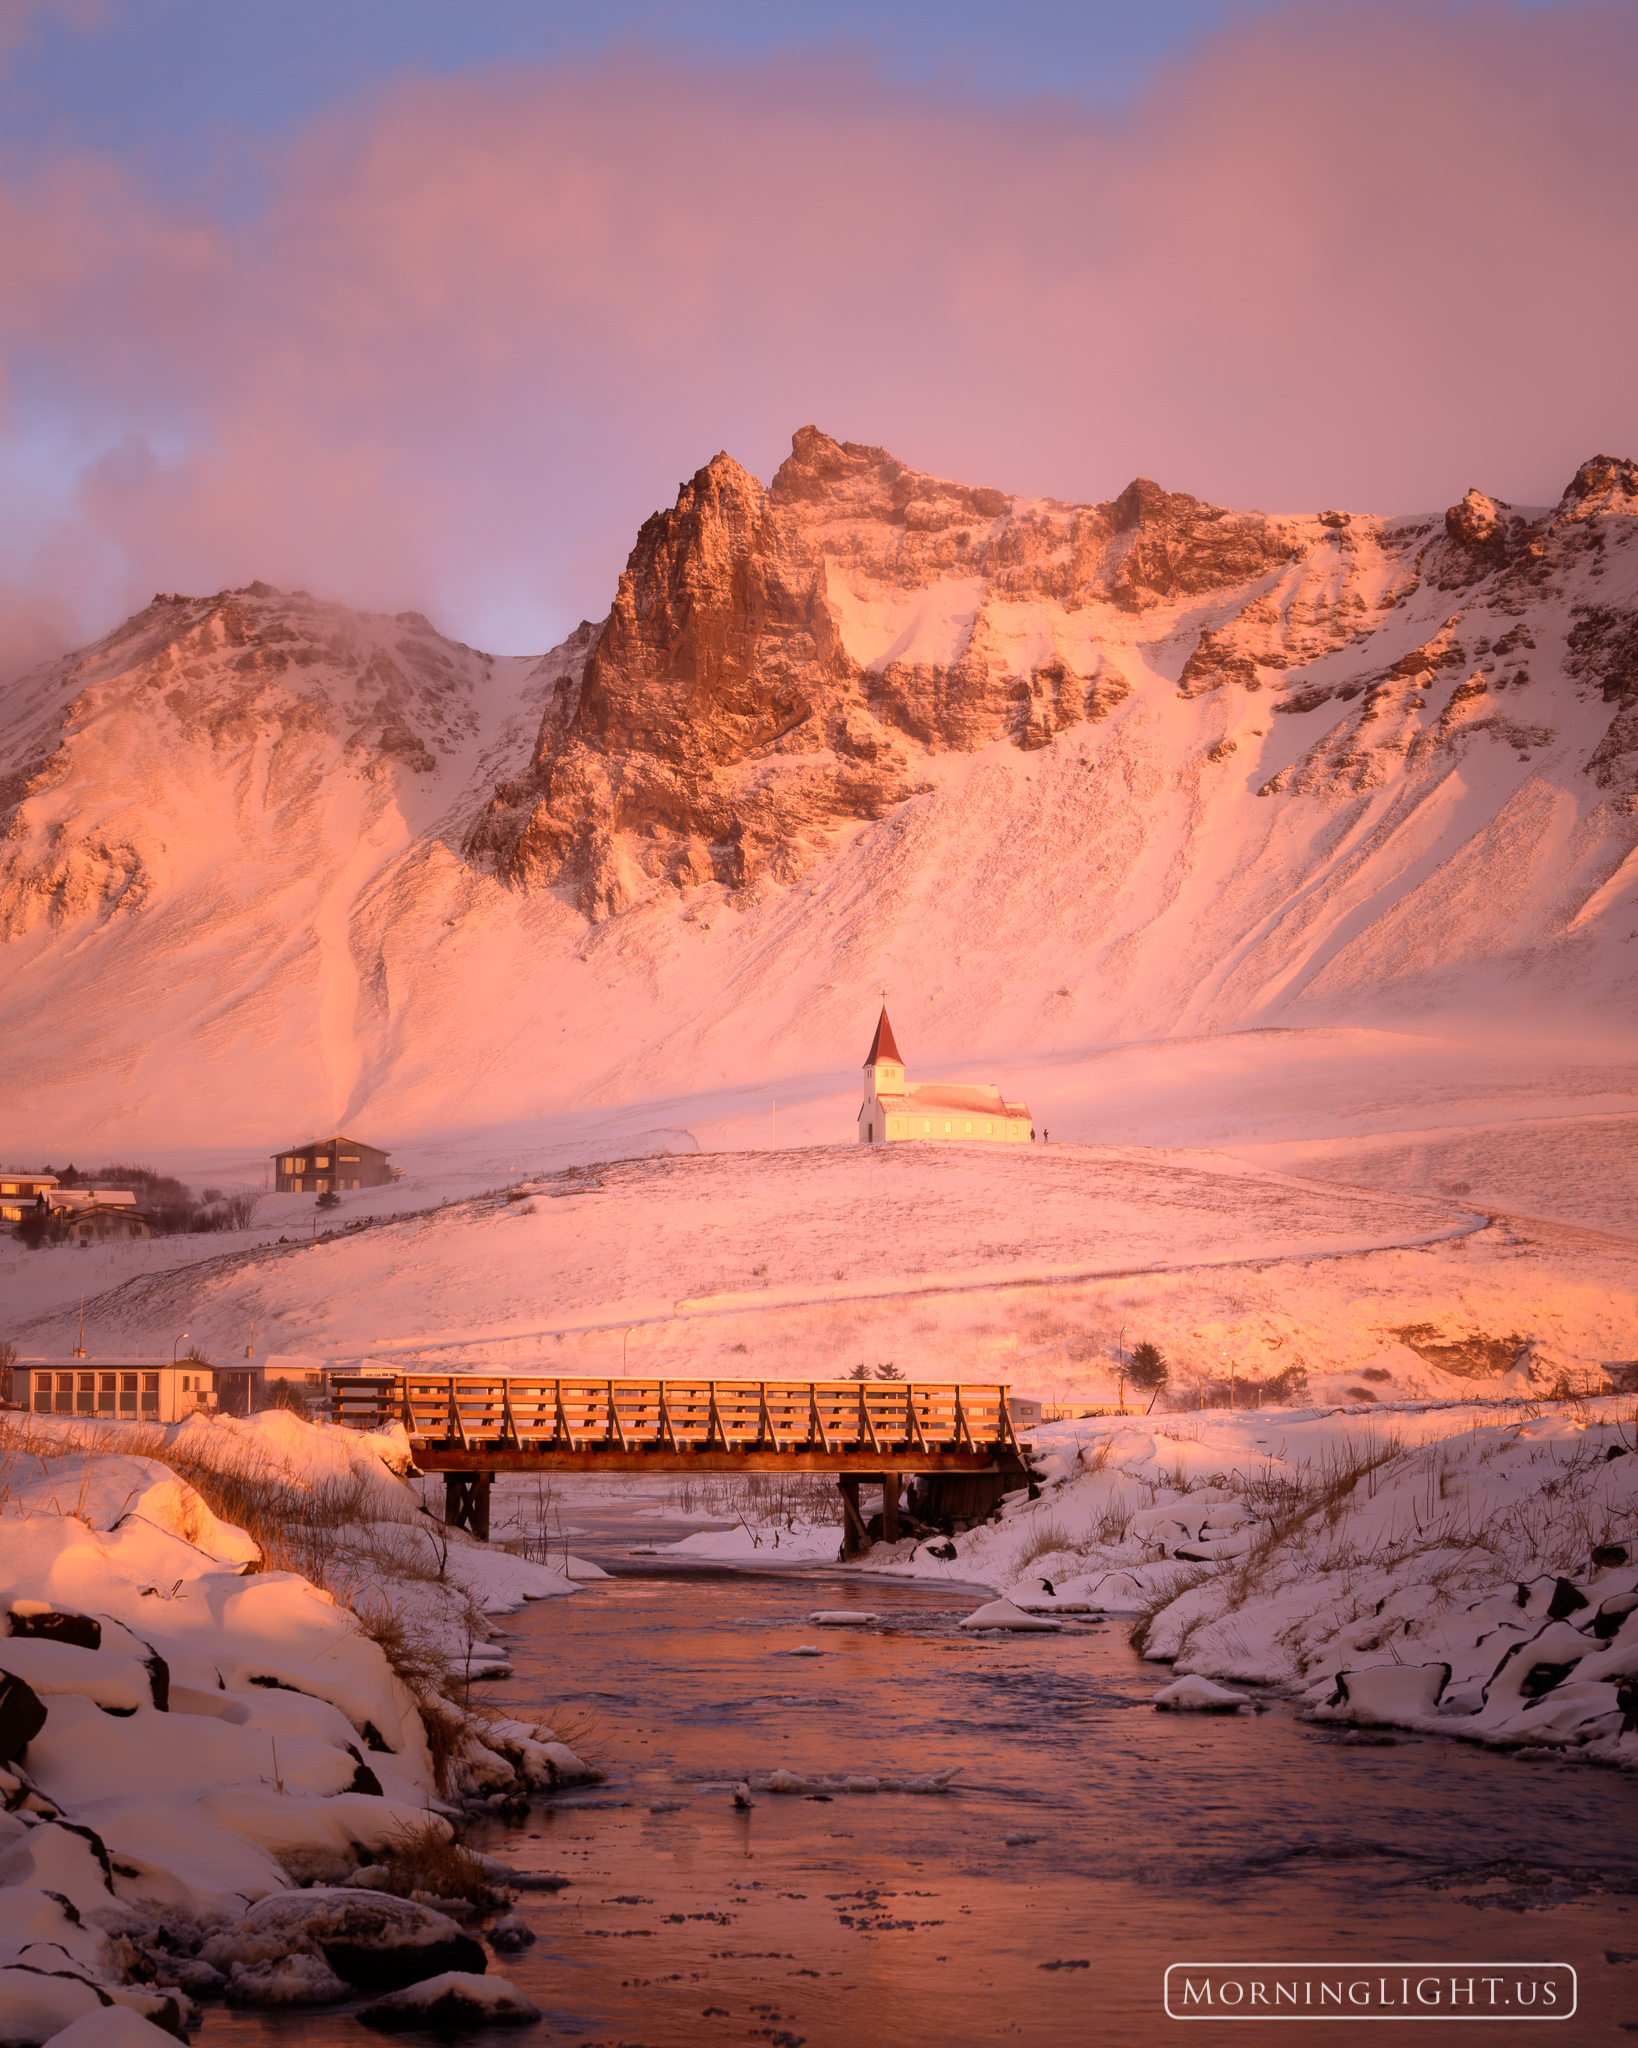 The beautiful village of Vik, Iceland welcomes visitors with its snowy charm.